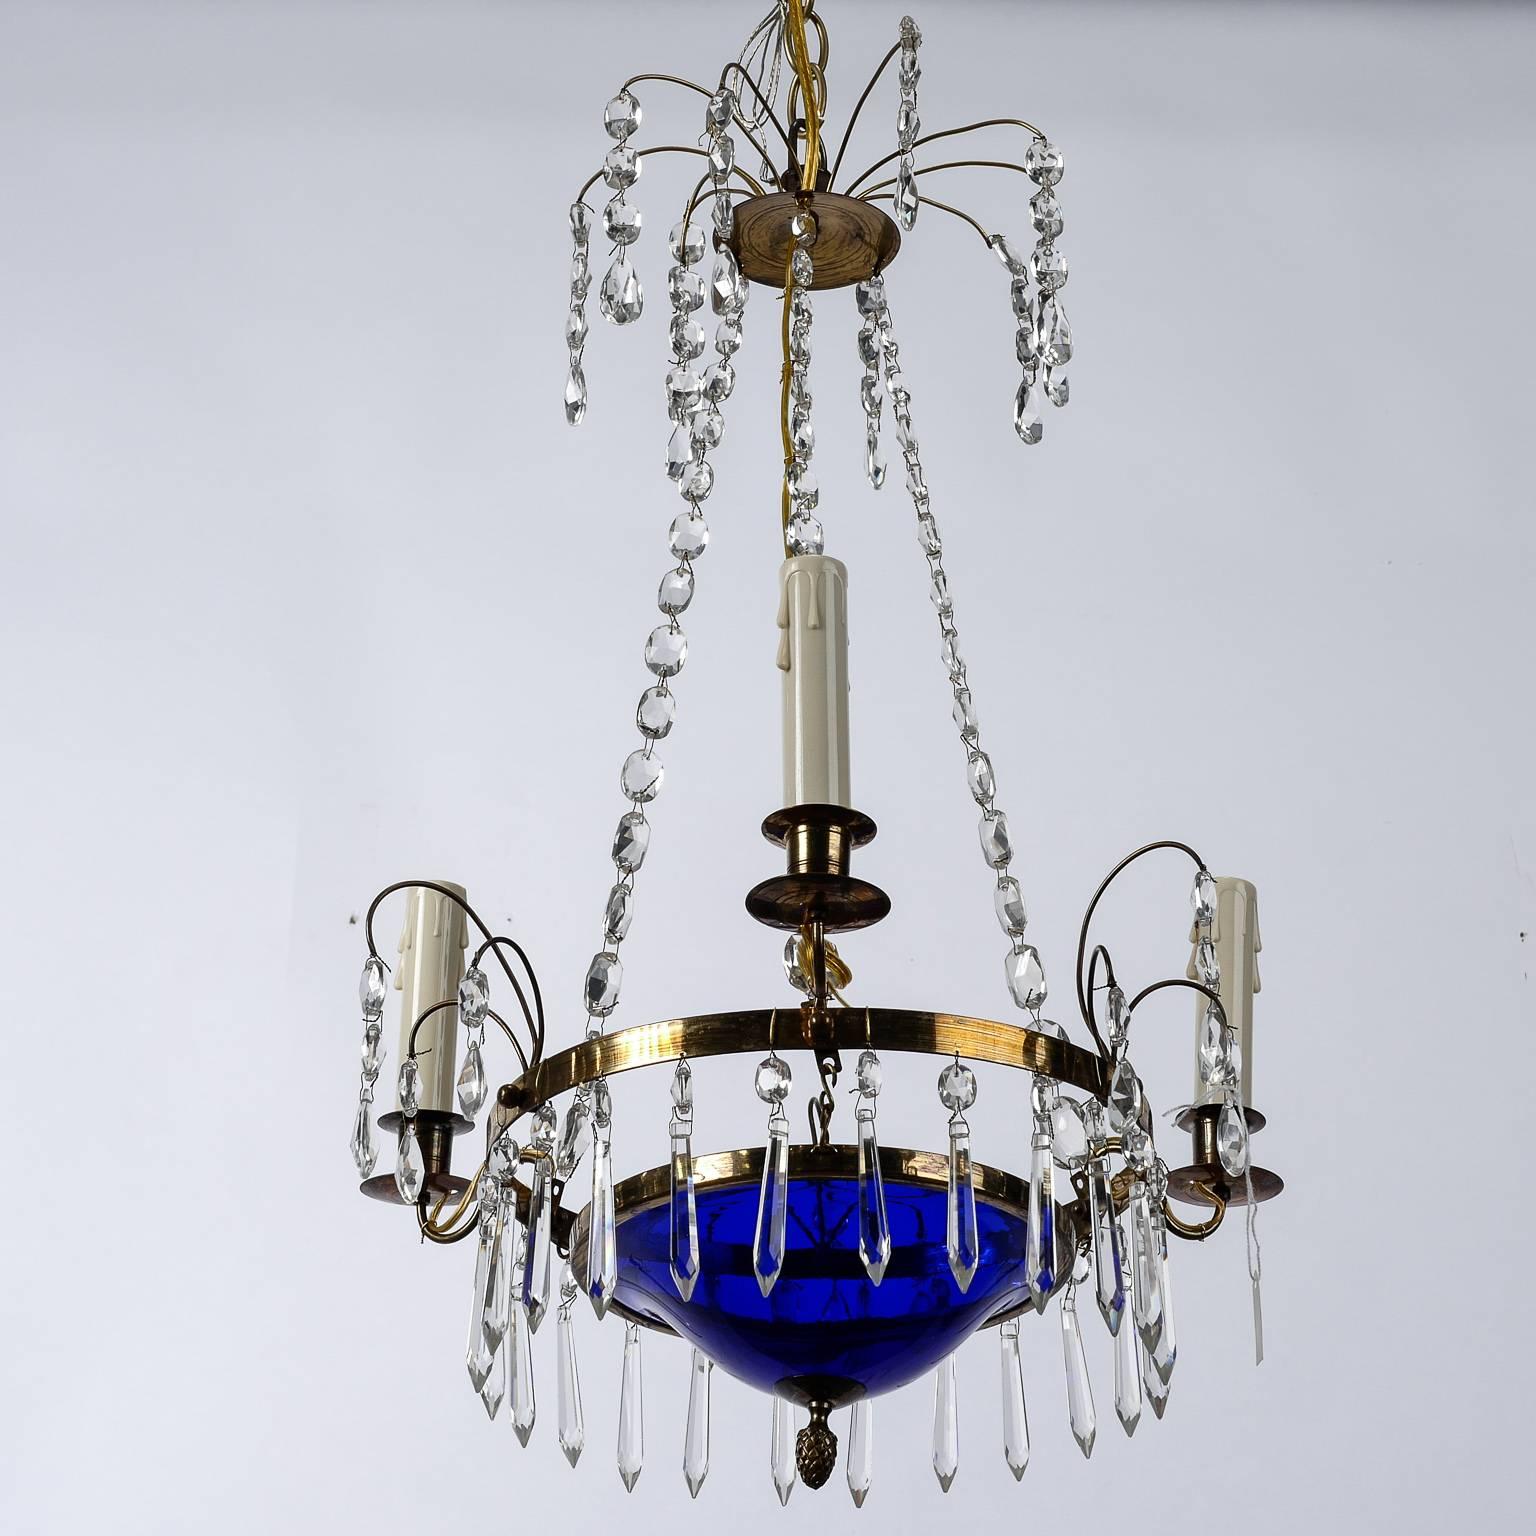 Small Swedish chandelier with brass frame, cobalt blue glass bowl, three candle style lights, crystal beading and pendants, circa 1900. New wiring for US electrical standards.